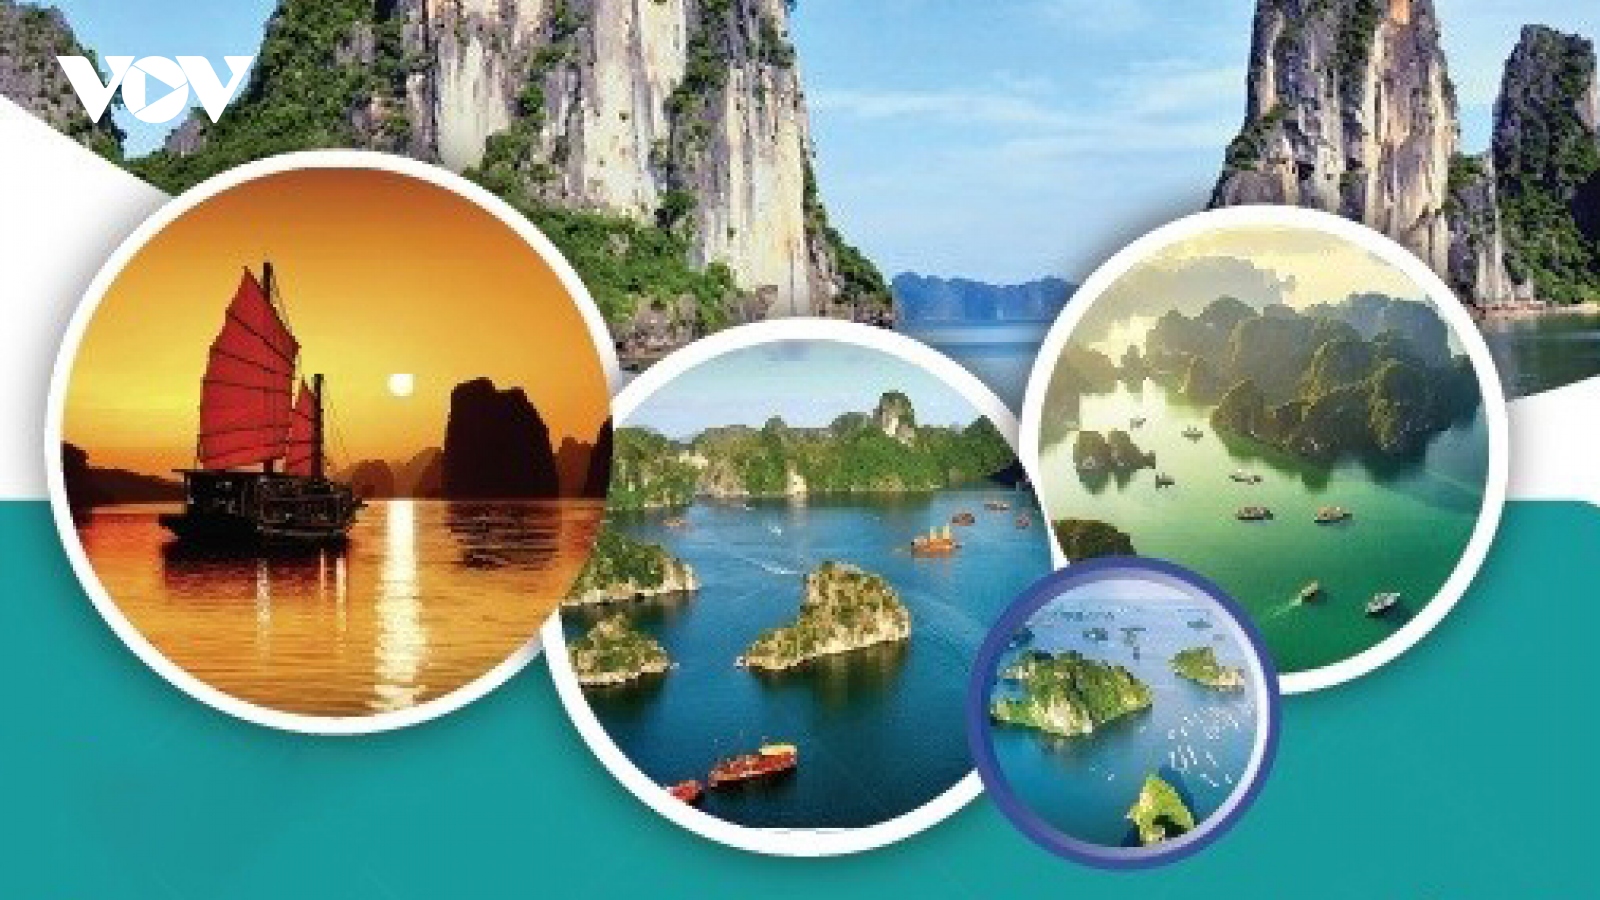 Travel tips to Ha Long: where to visit and what to do